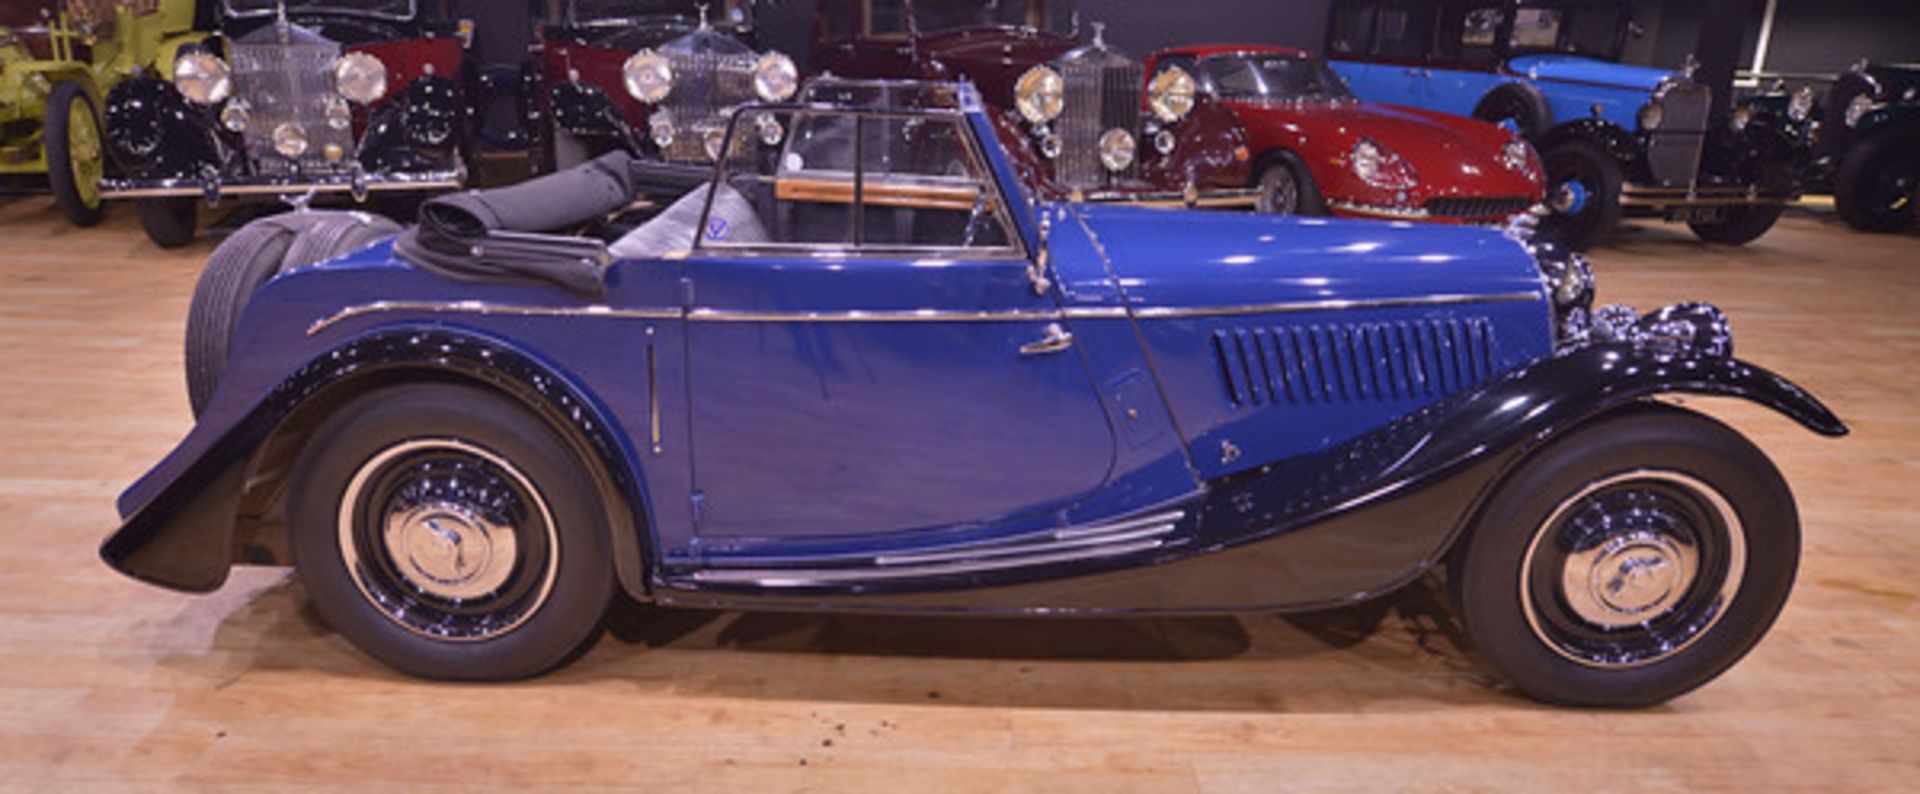 1938 4/4 Morgan Drop Head Coupe Flat Rad
The Drop head Coupe was considered to be the most - Image 4 of 11